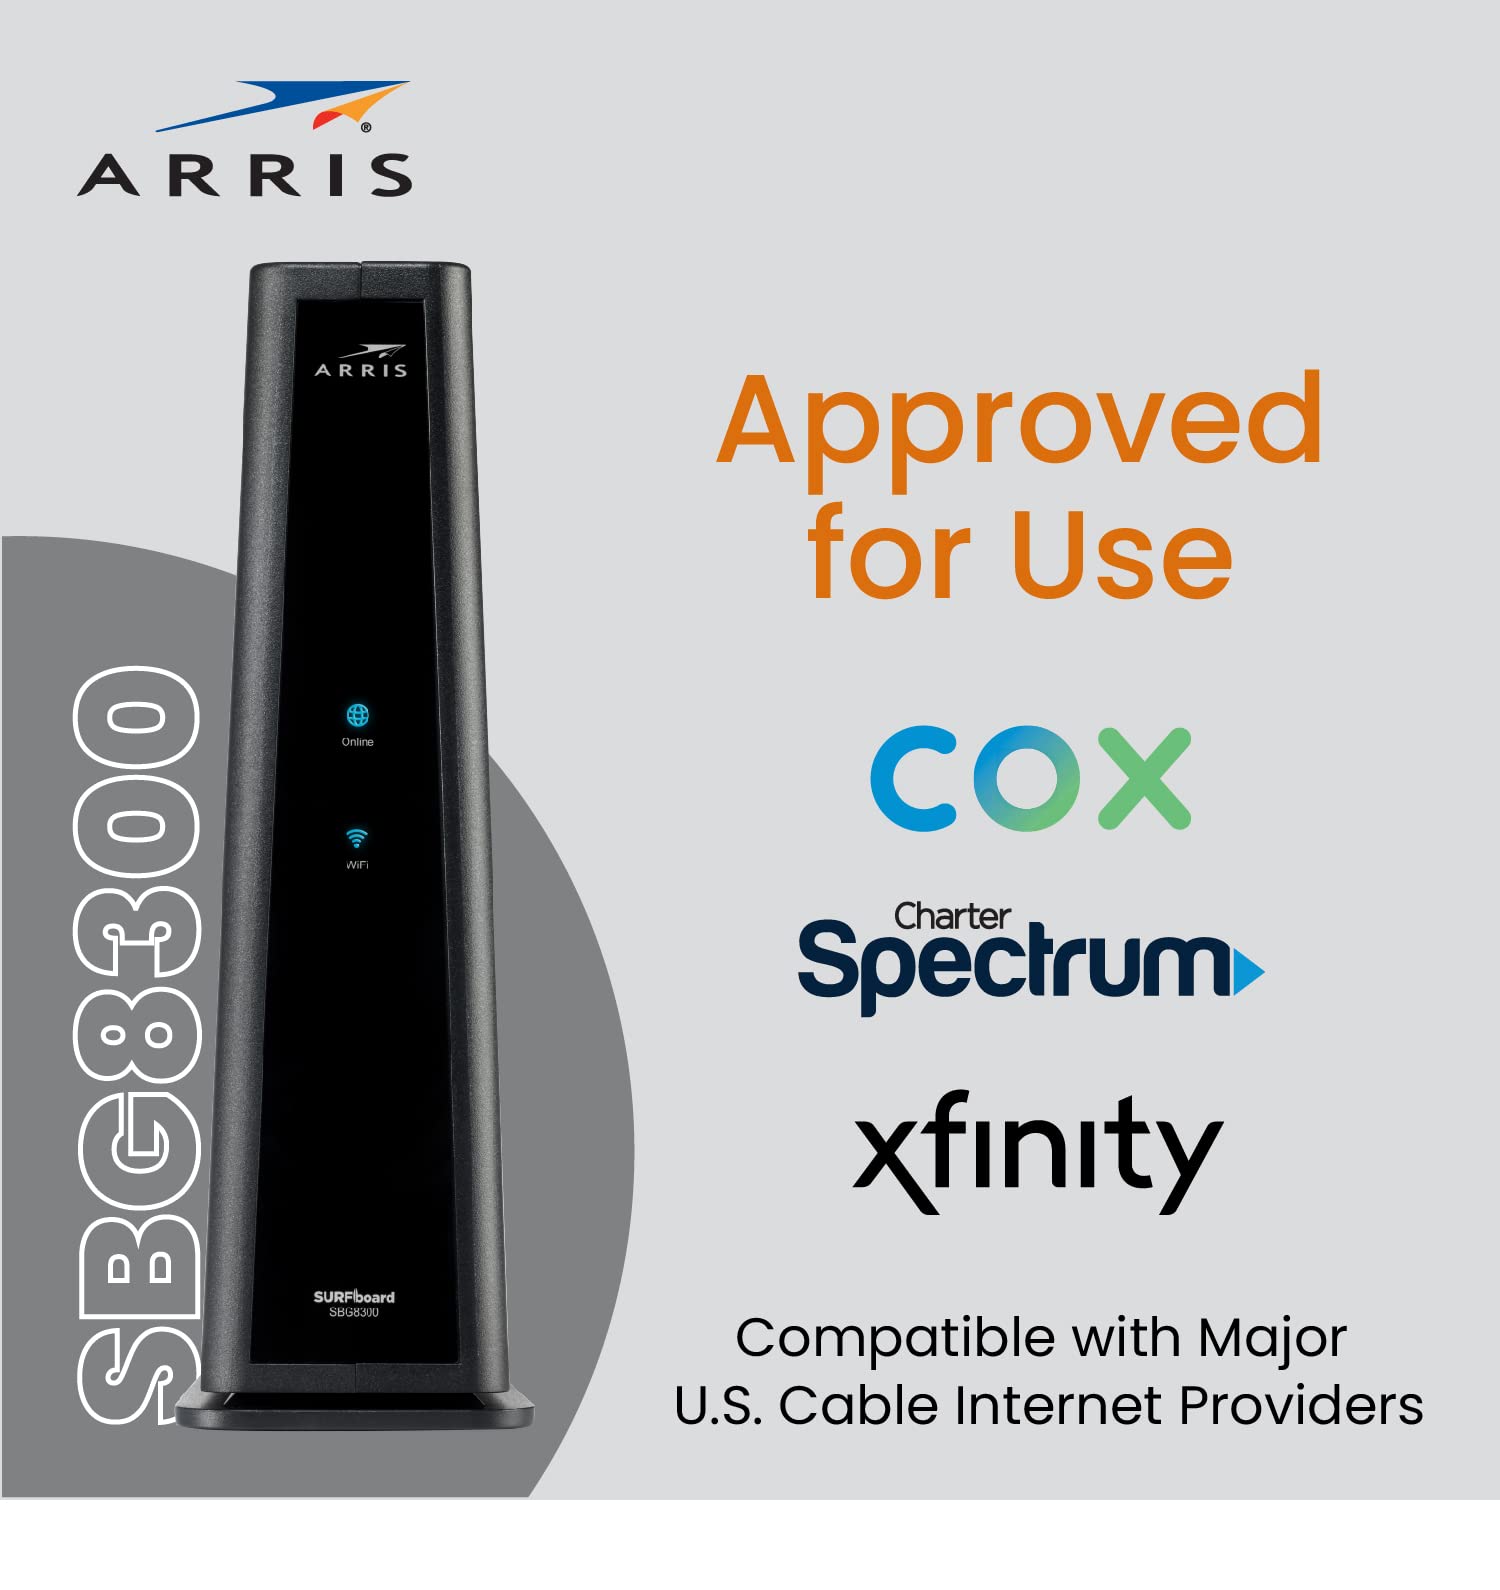 ARRIS Surfboard SBG8300 DOCSIS 3.1 Gigabit Cable Modem & AC2350 Wi-Fi Router & Roku Express (New) | HD Roku Streaming Device with Simple Remote (no TV Controls), Free & Live TV